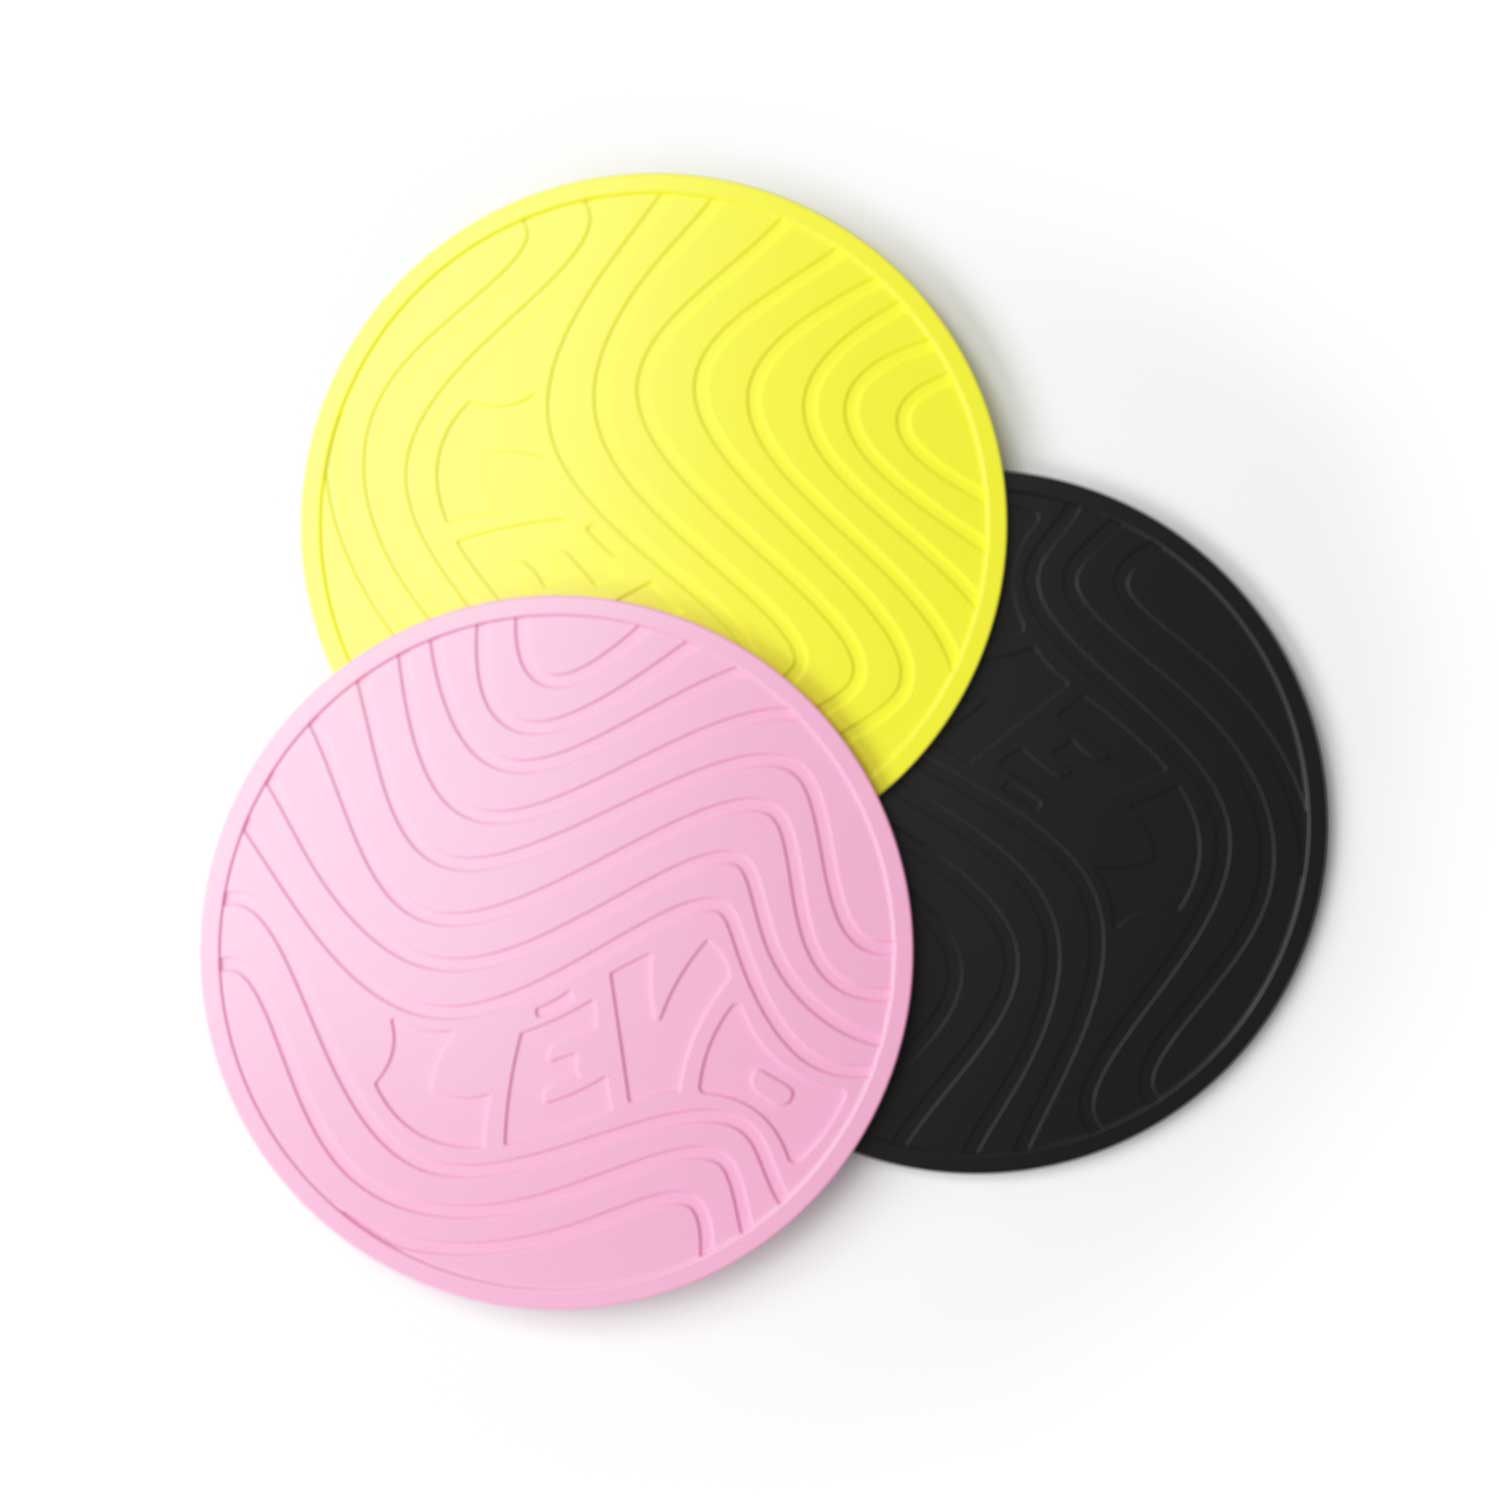 LĒVO Silicone Trivets in yellow, pink, and black